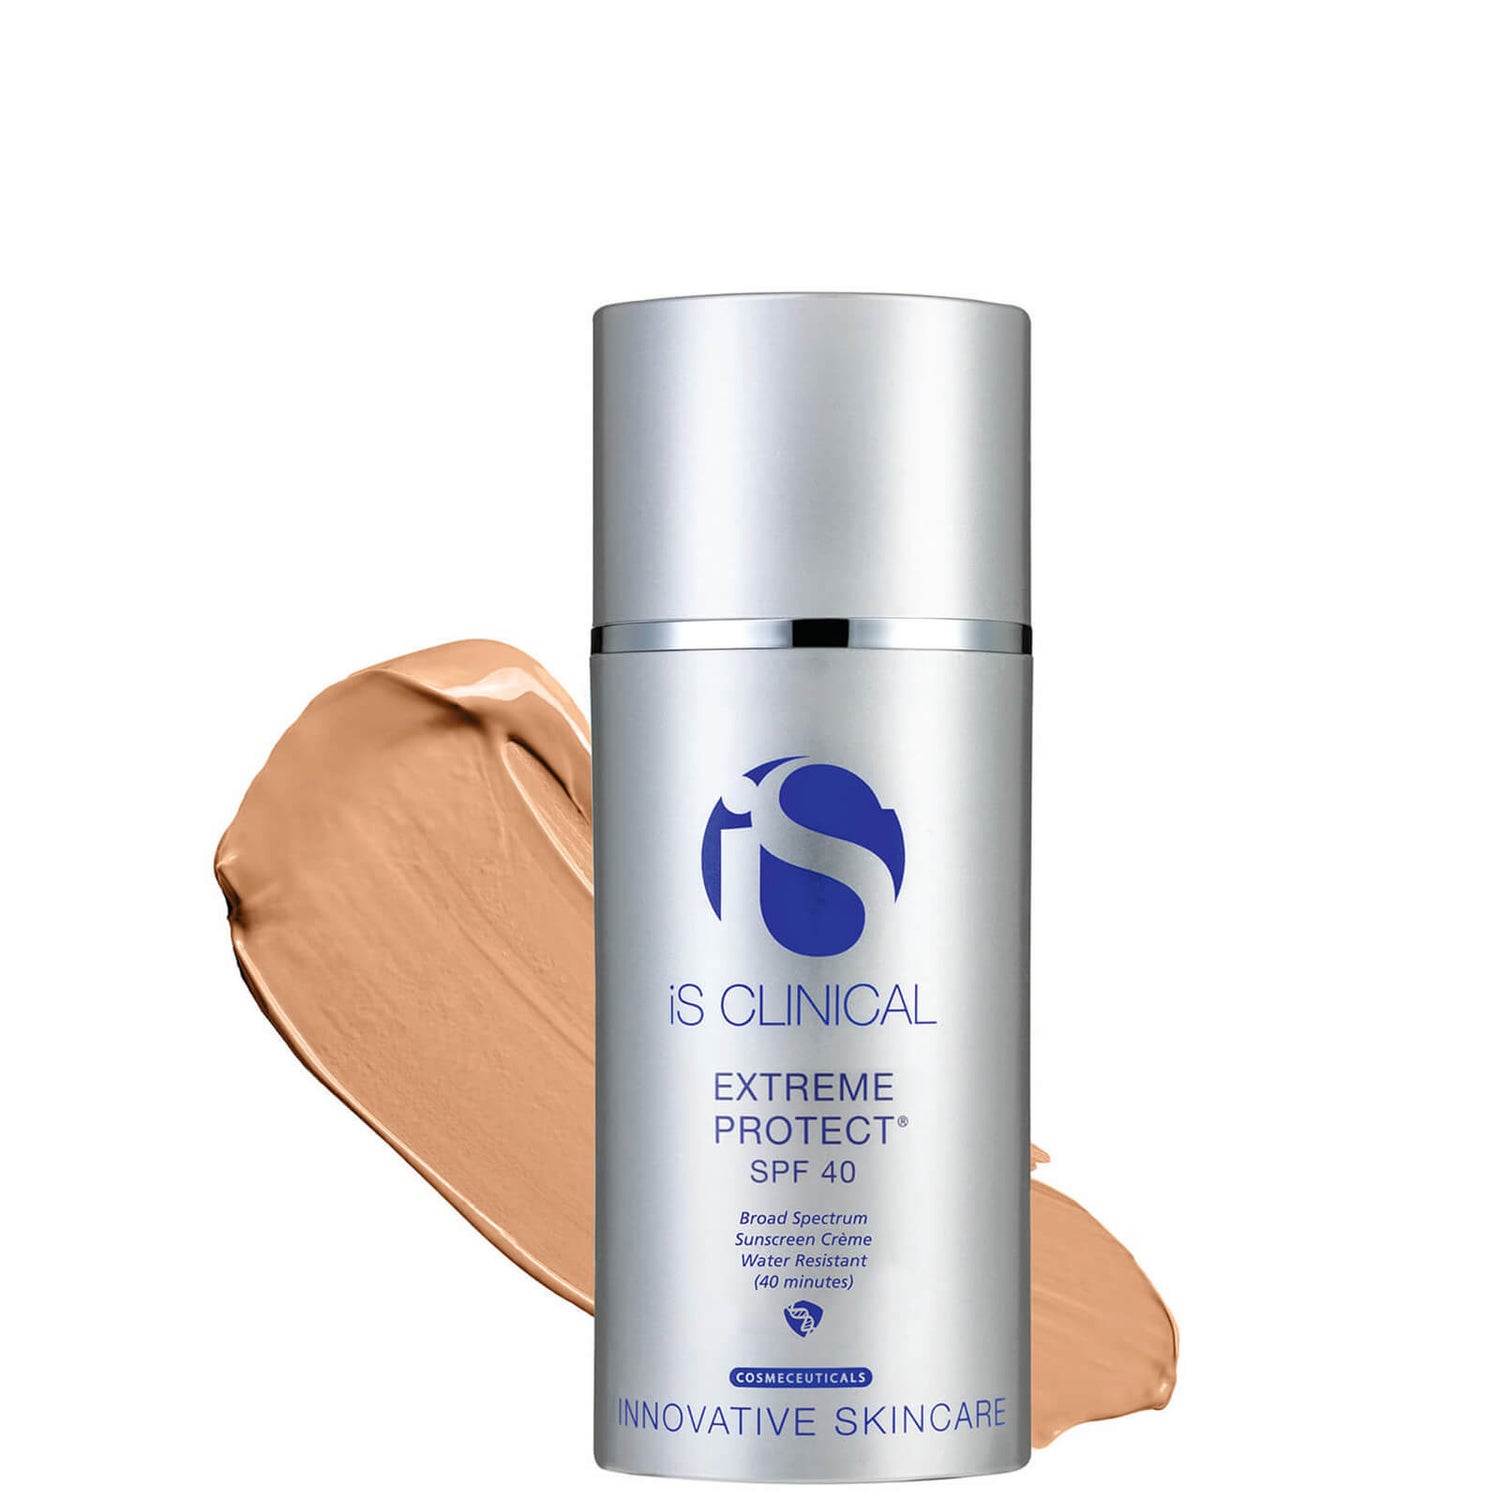 iS Clinical Extreme Protect SPF 40 PerfecTint 100 g. - Bronze